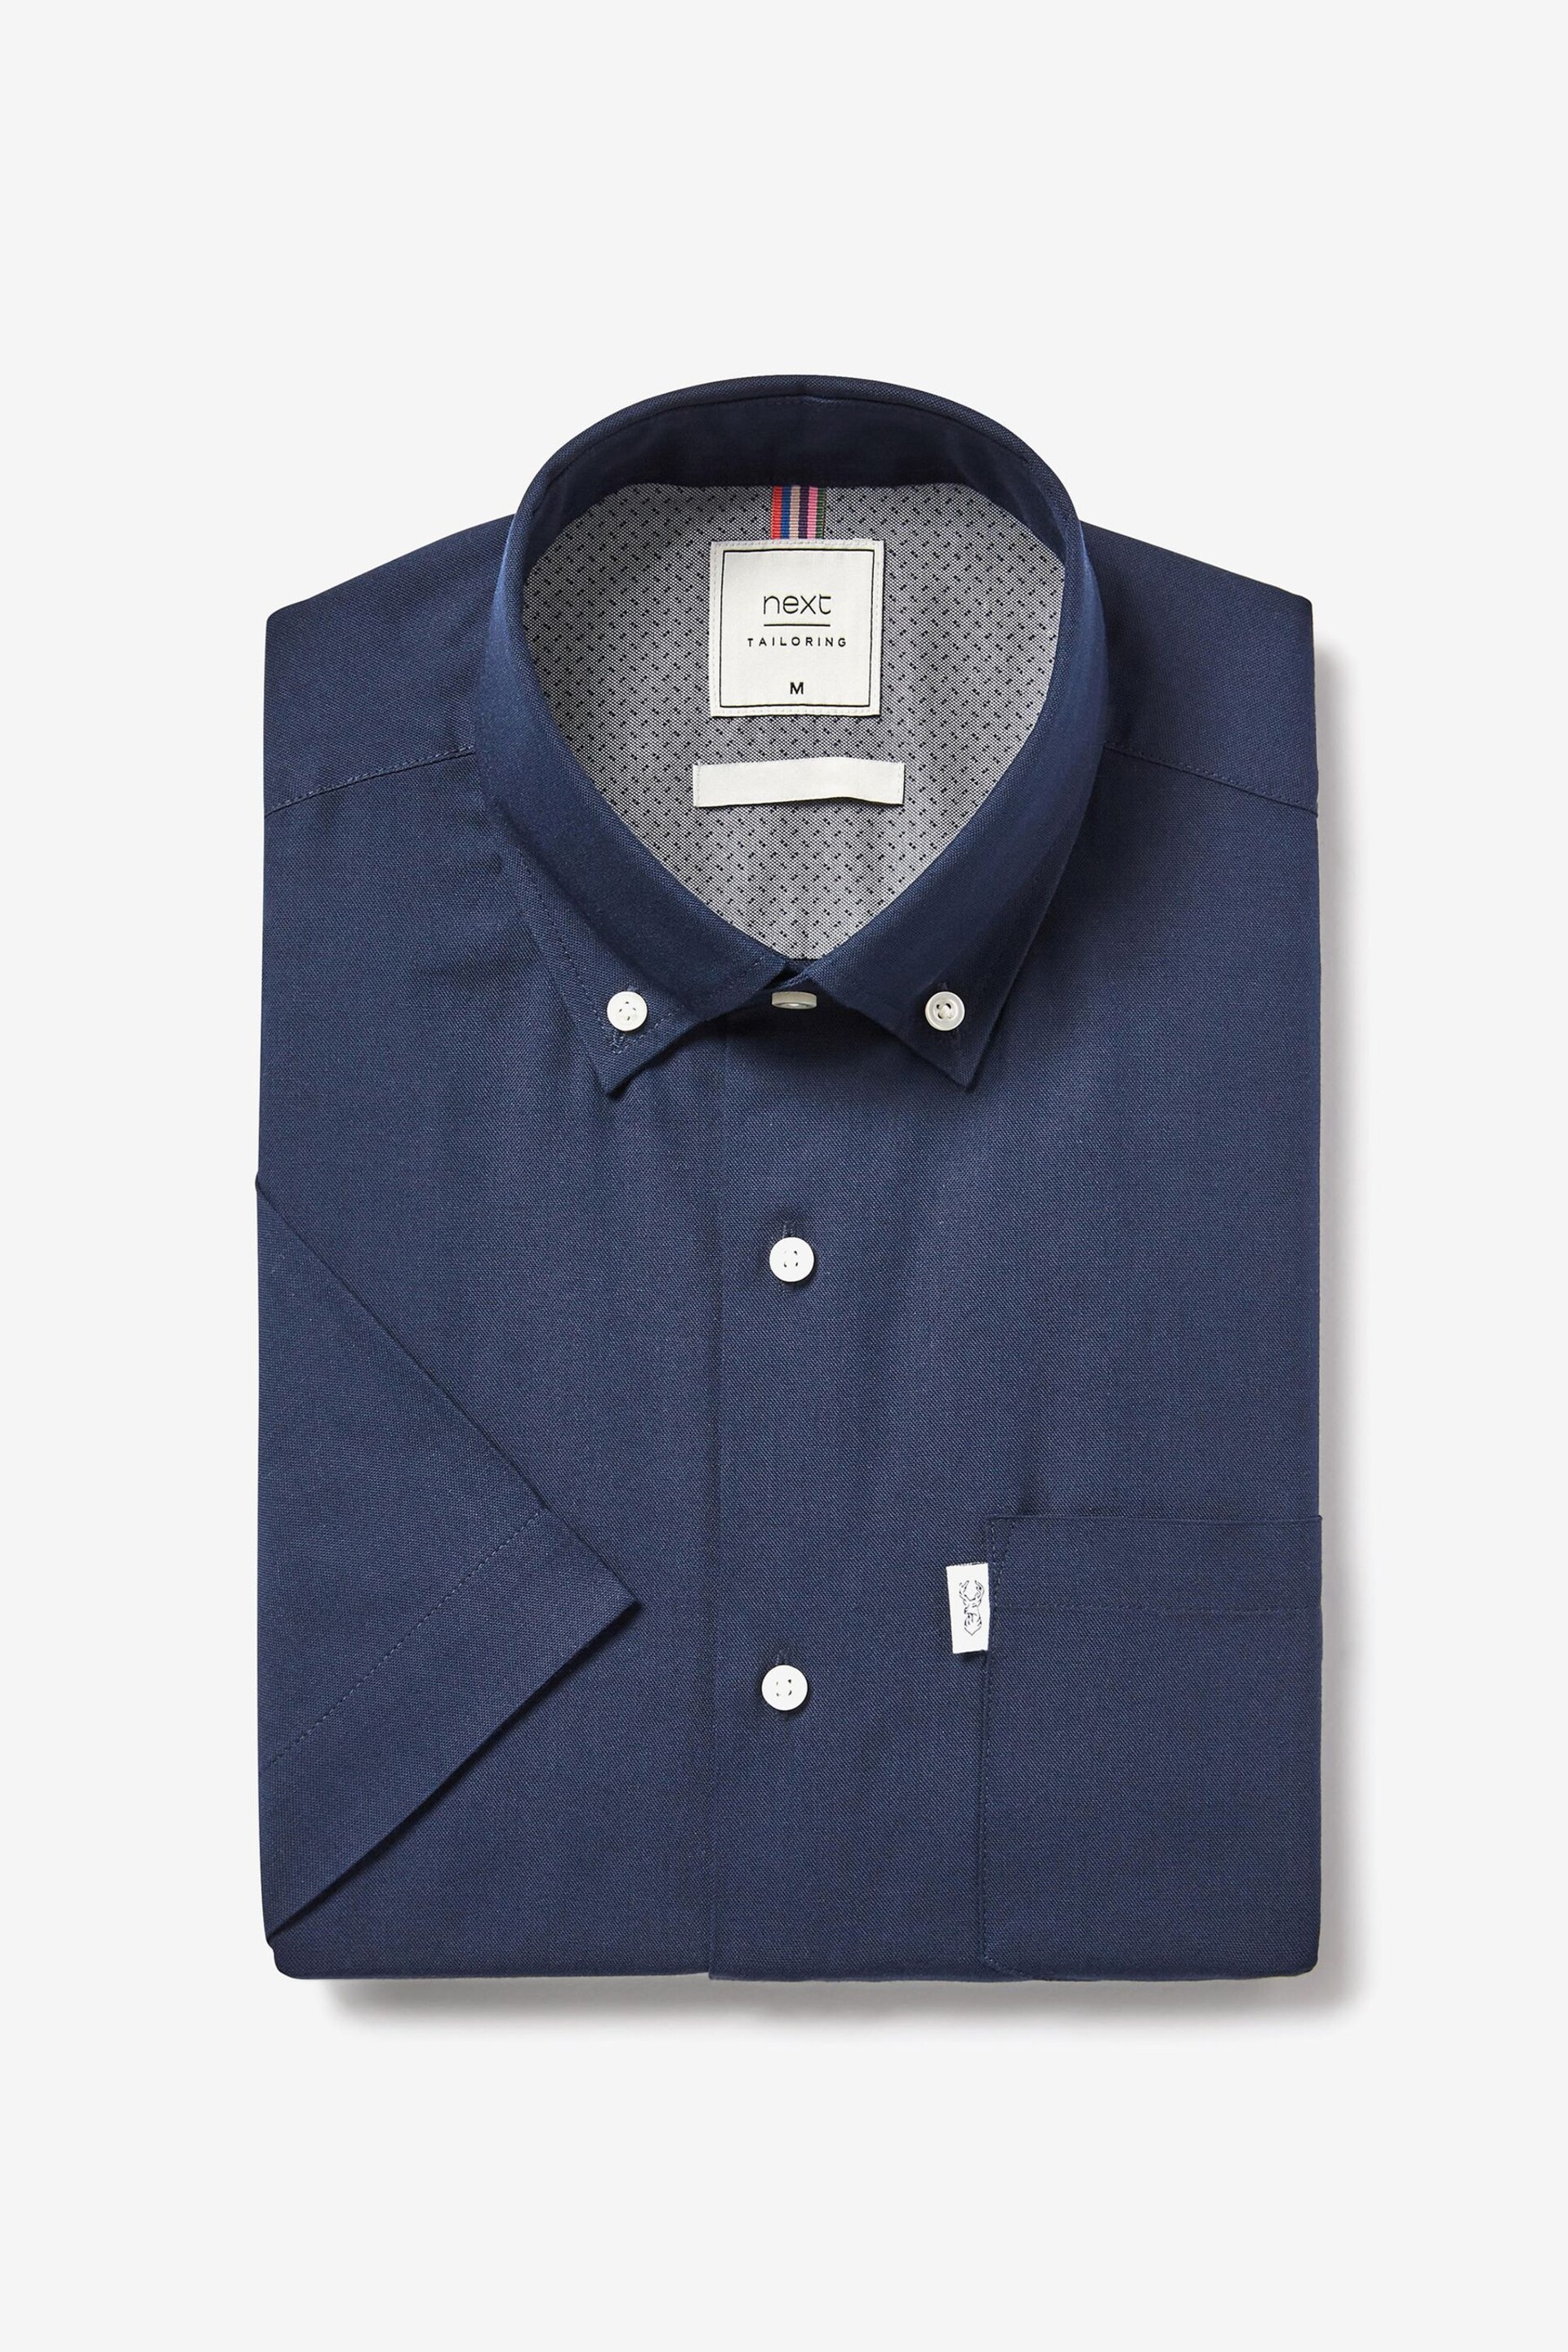 Navy Blue Easy Iron Button Down Short Sleeve Oxford Shirt - Image 5 of 7